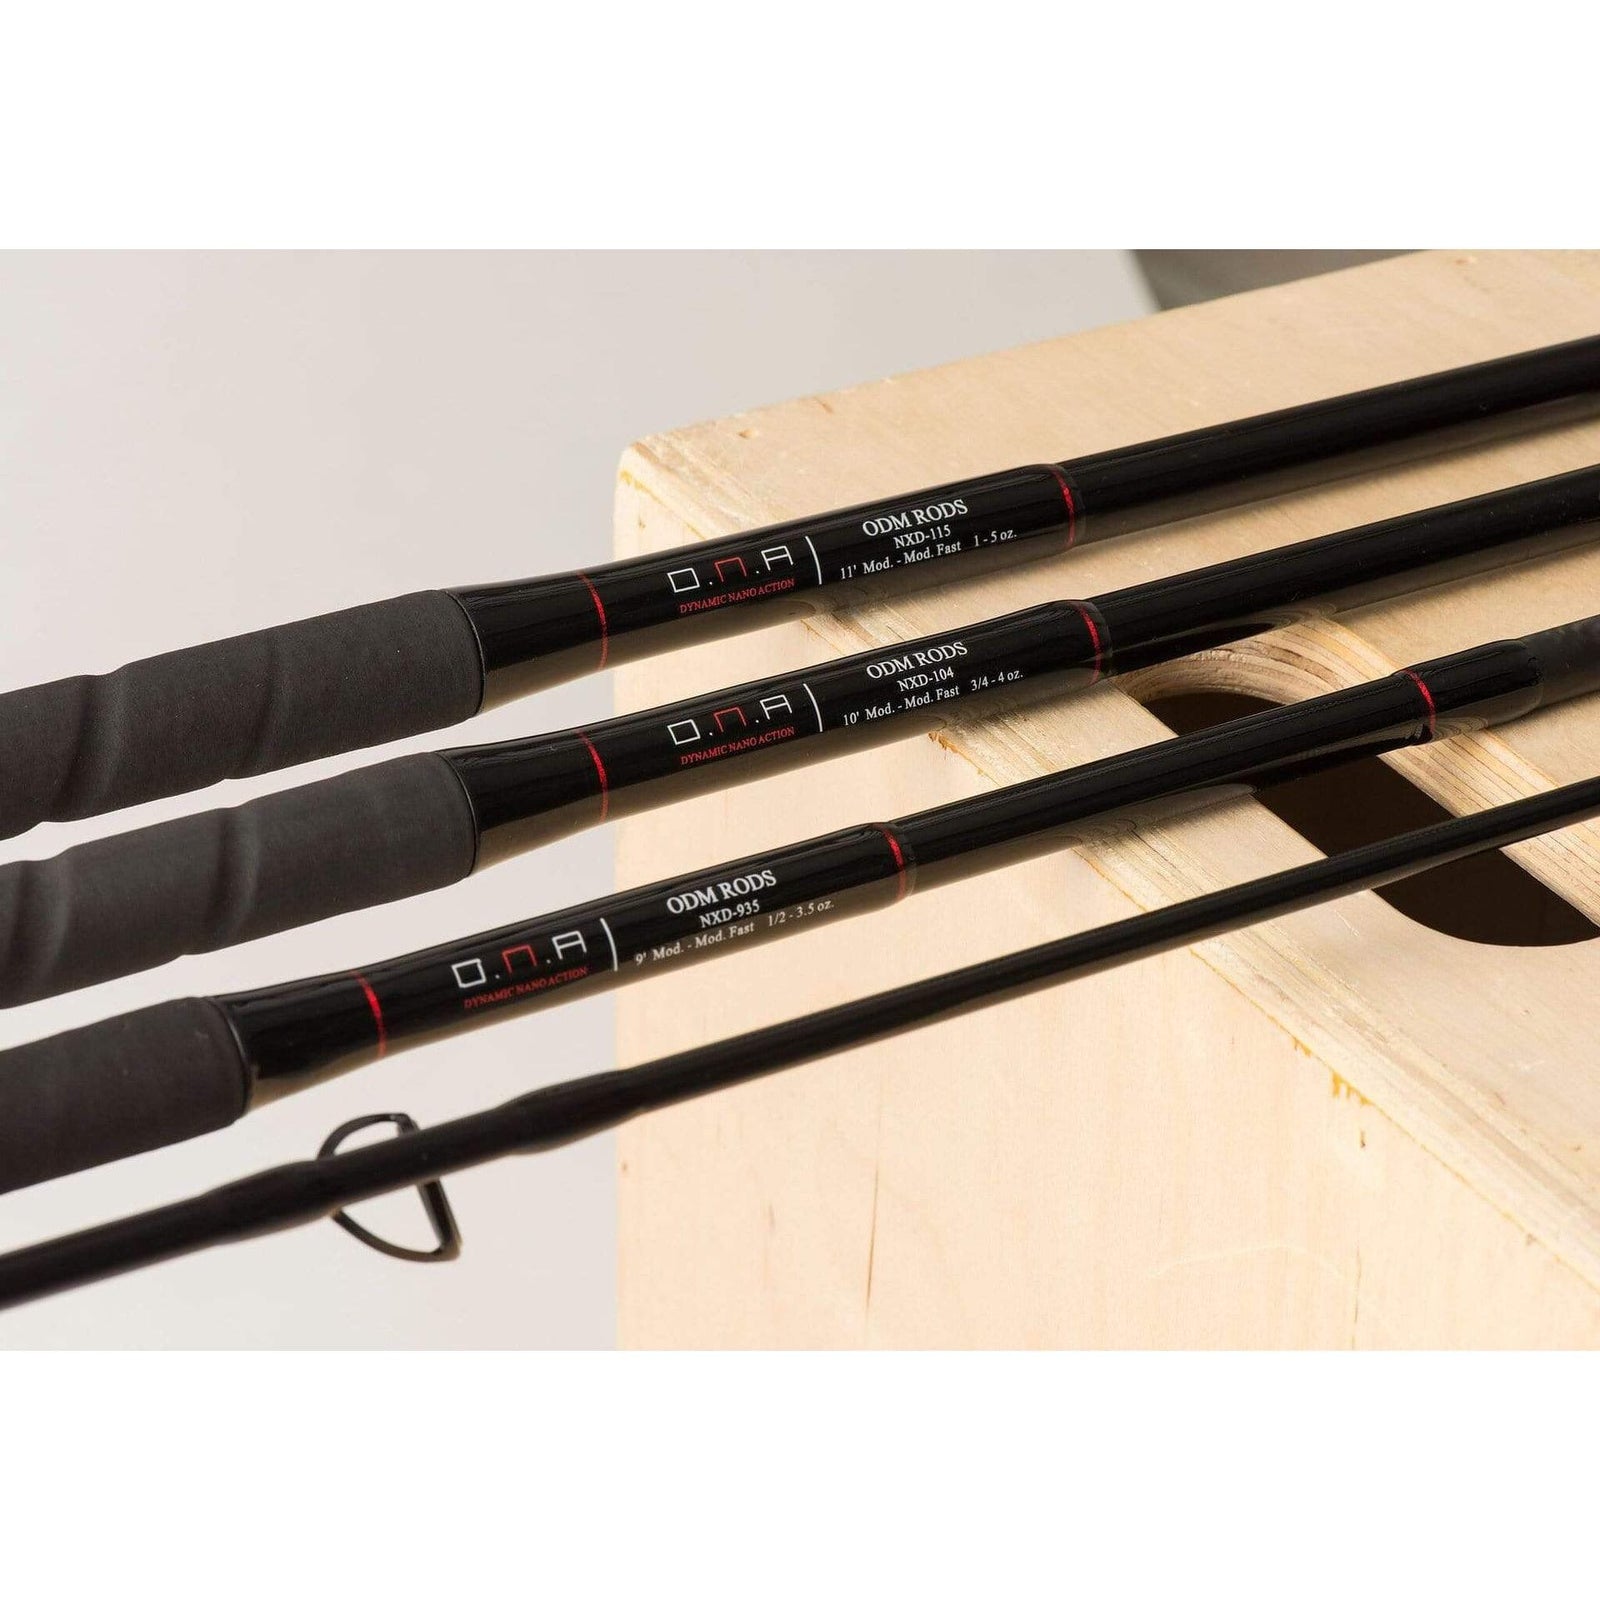 Surf Rods - The Saltwater Edge